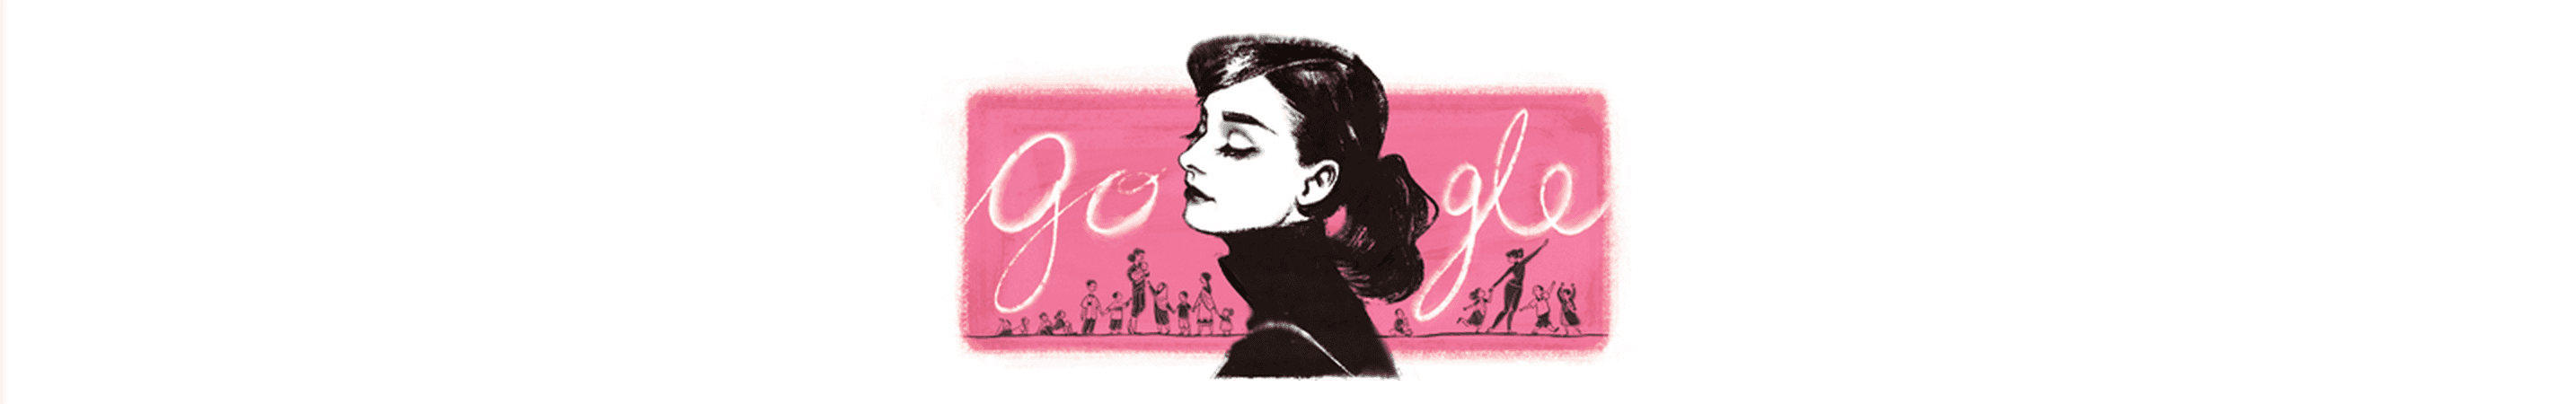 Unending Love, Audrey Hepburn's Favorite Poem by Rabindranath Tagore feature image